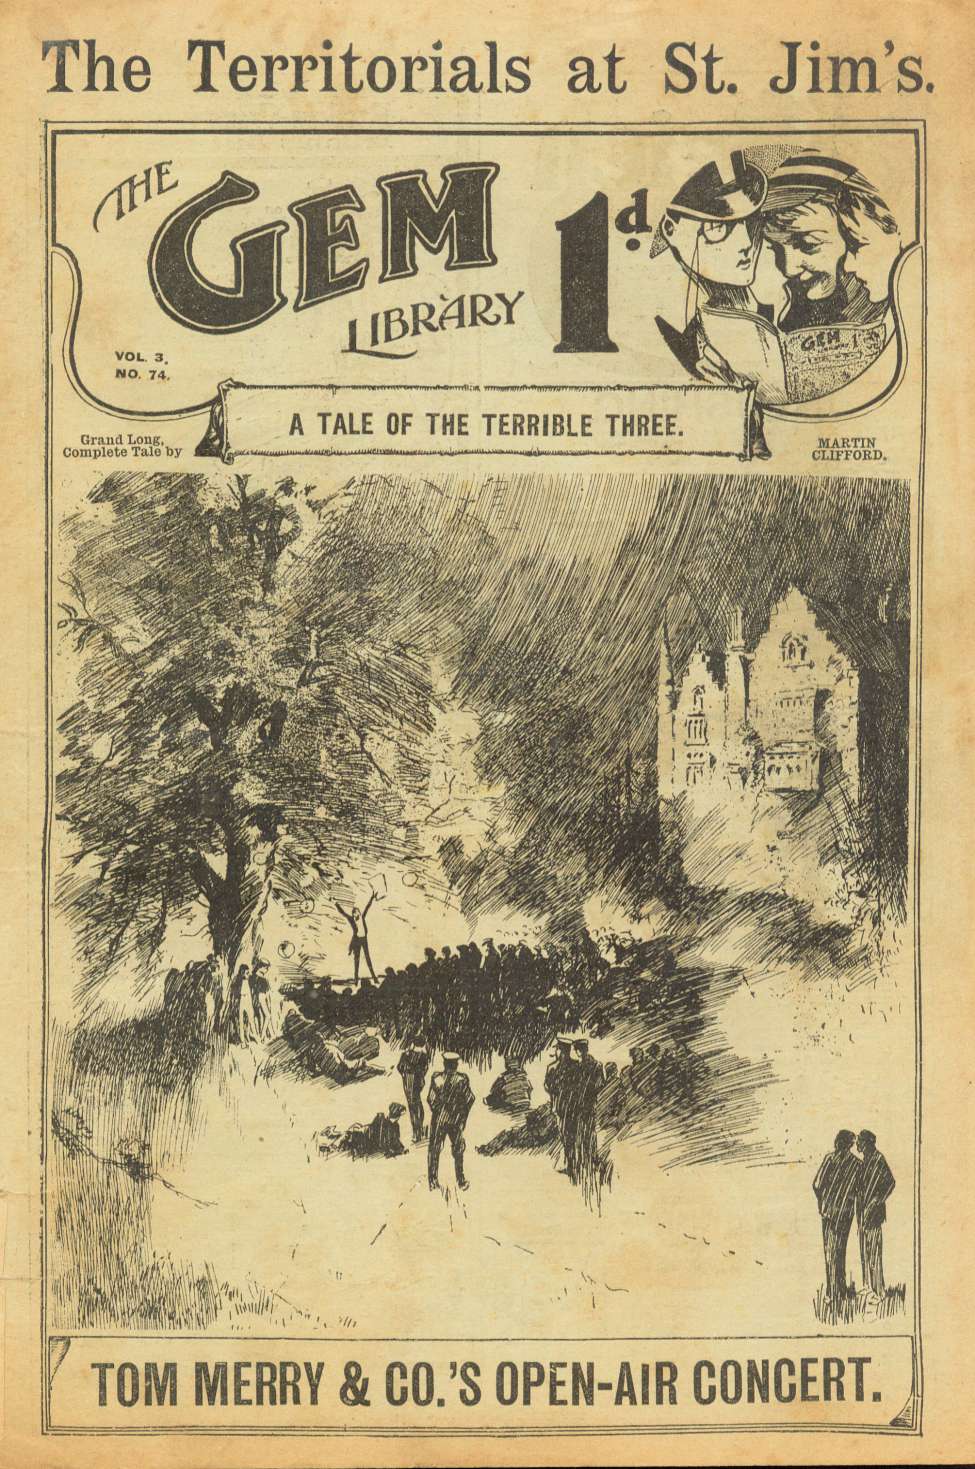 Book Cover For The Gem v2 74 - The Territorials of St. Jim’s